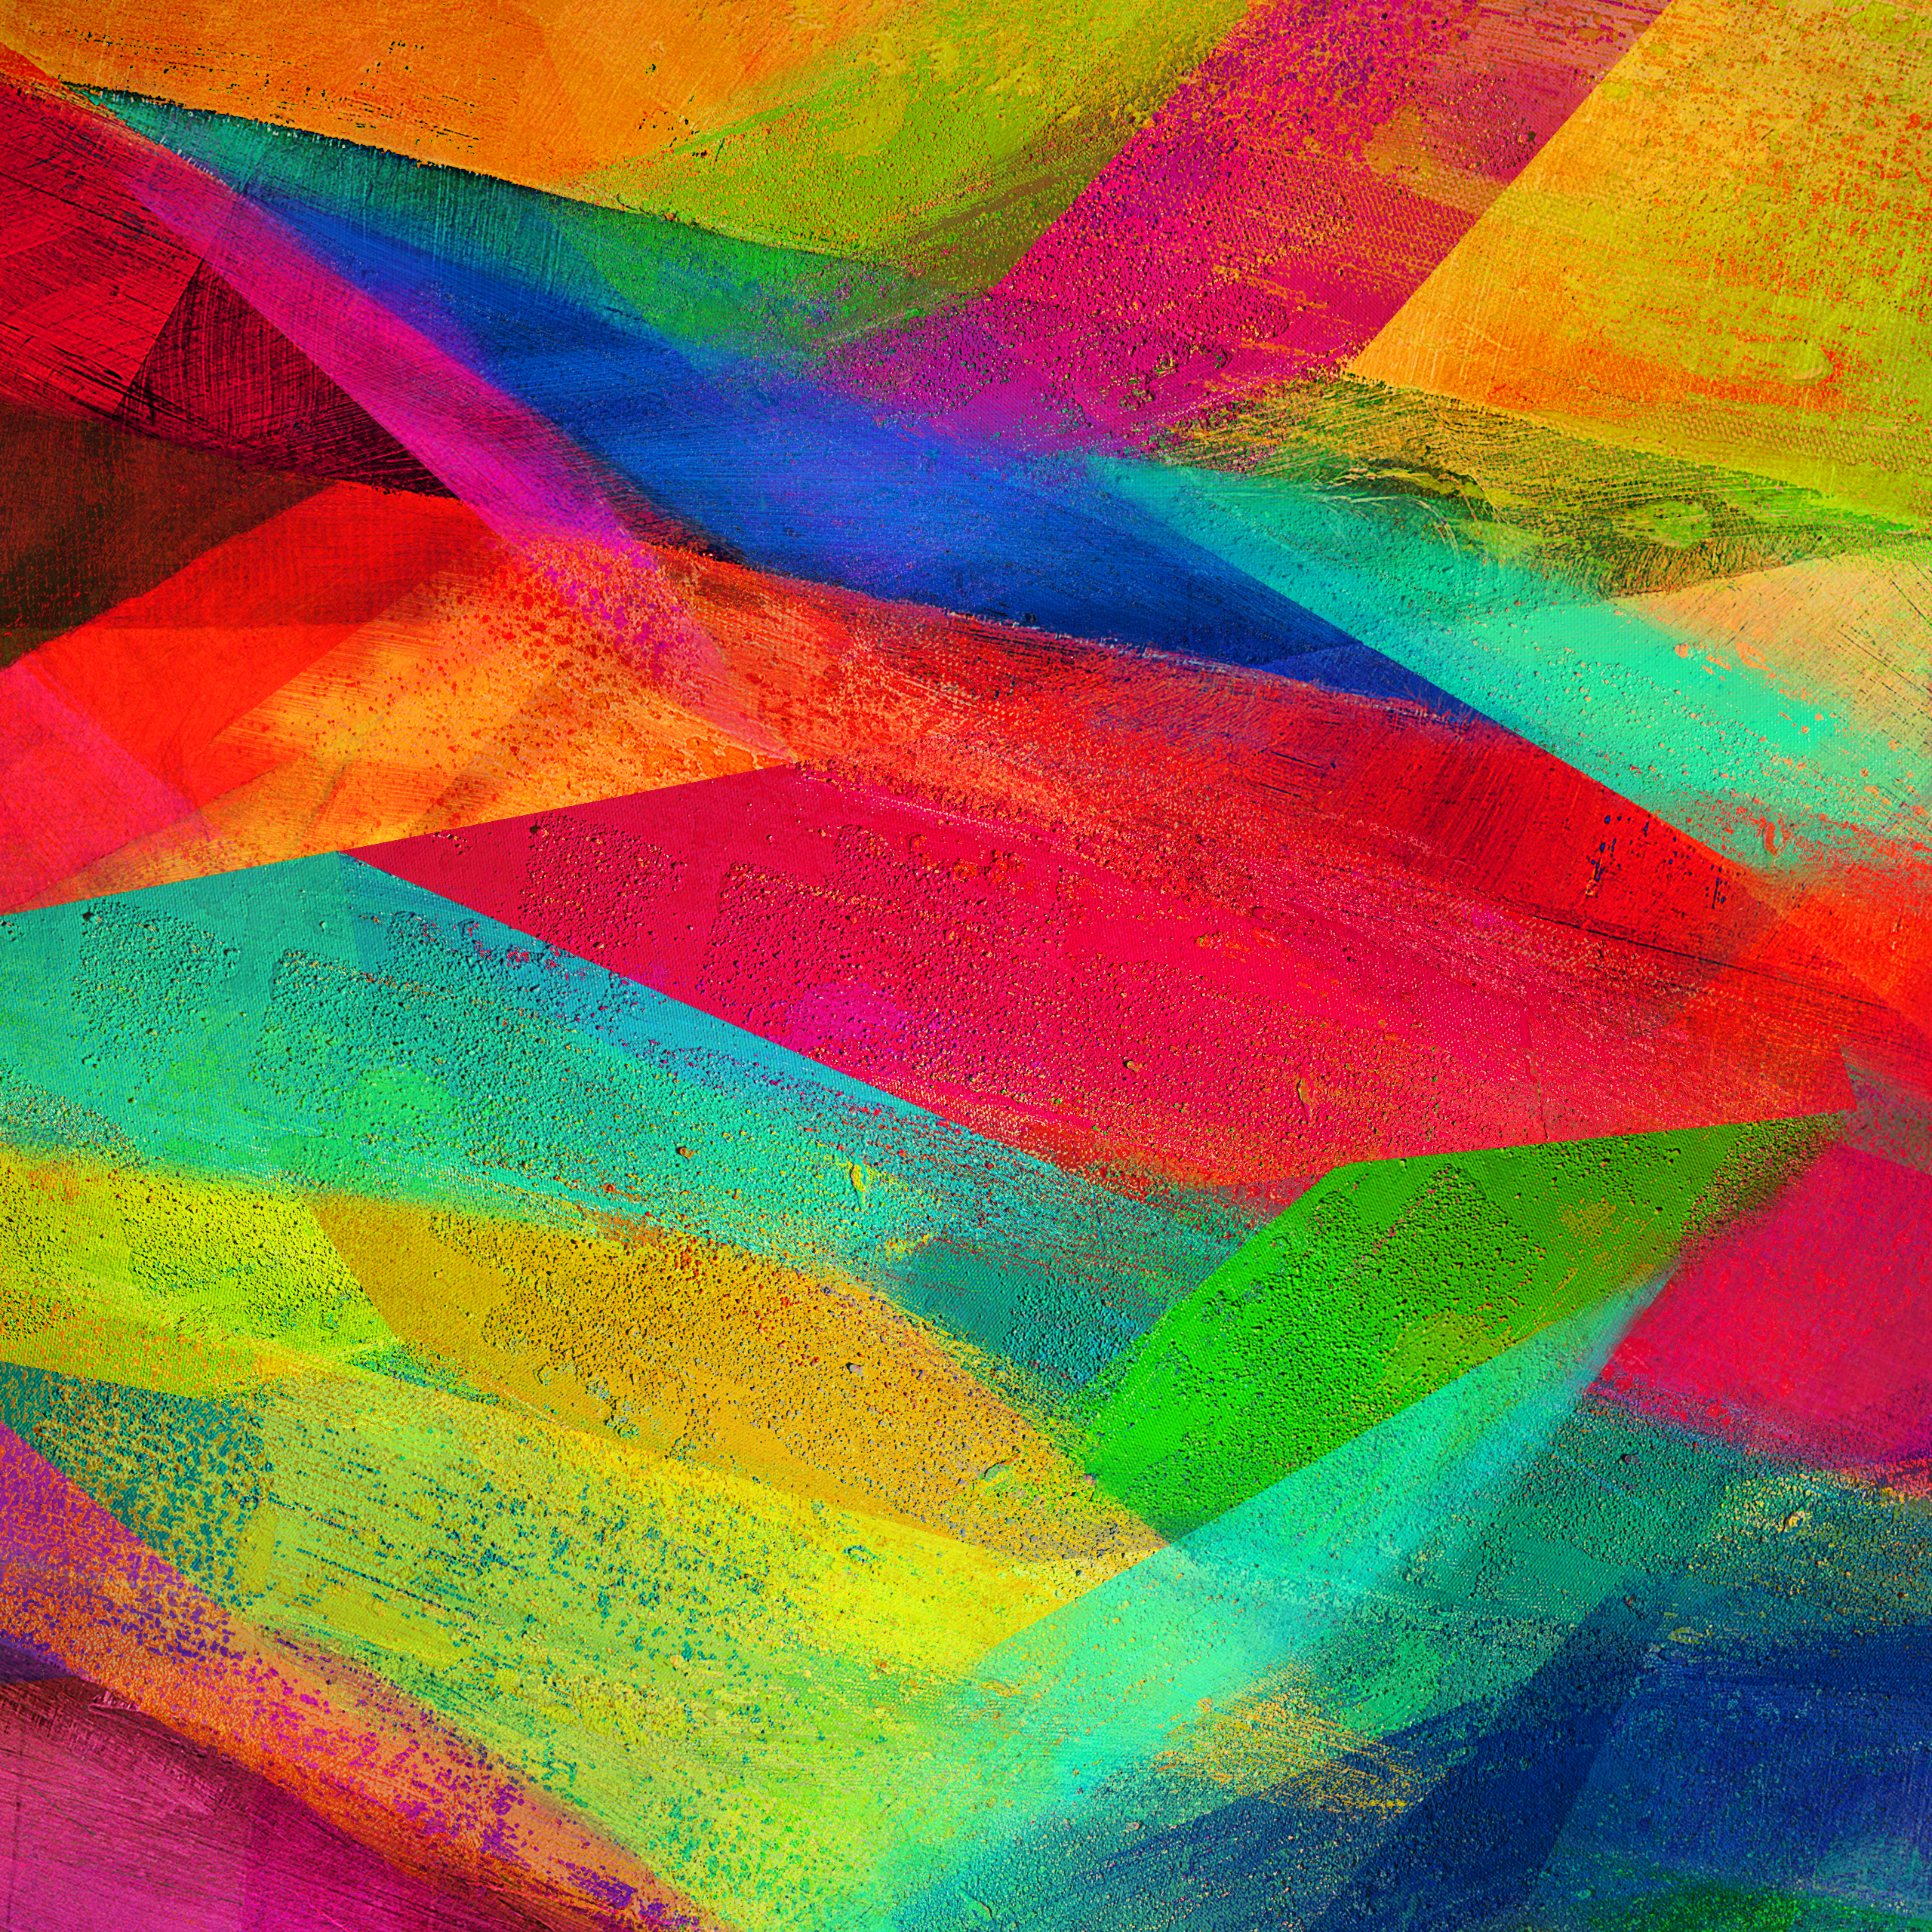 Get hyped up with the Galaxy Note 4 QHD wallpaper! [DOWNLOAD]